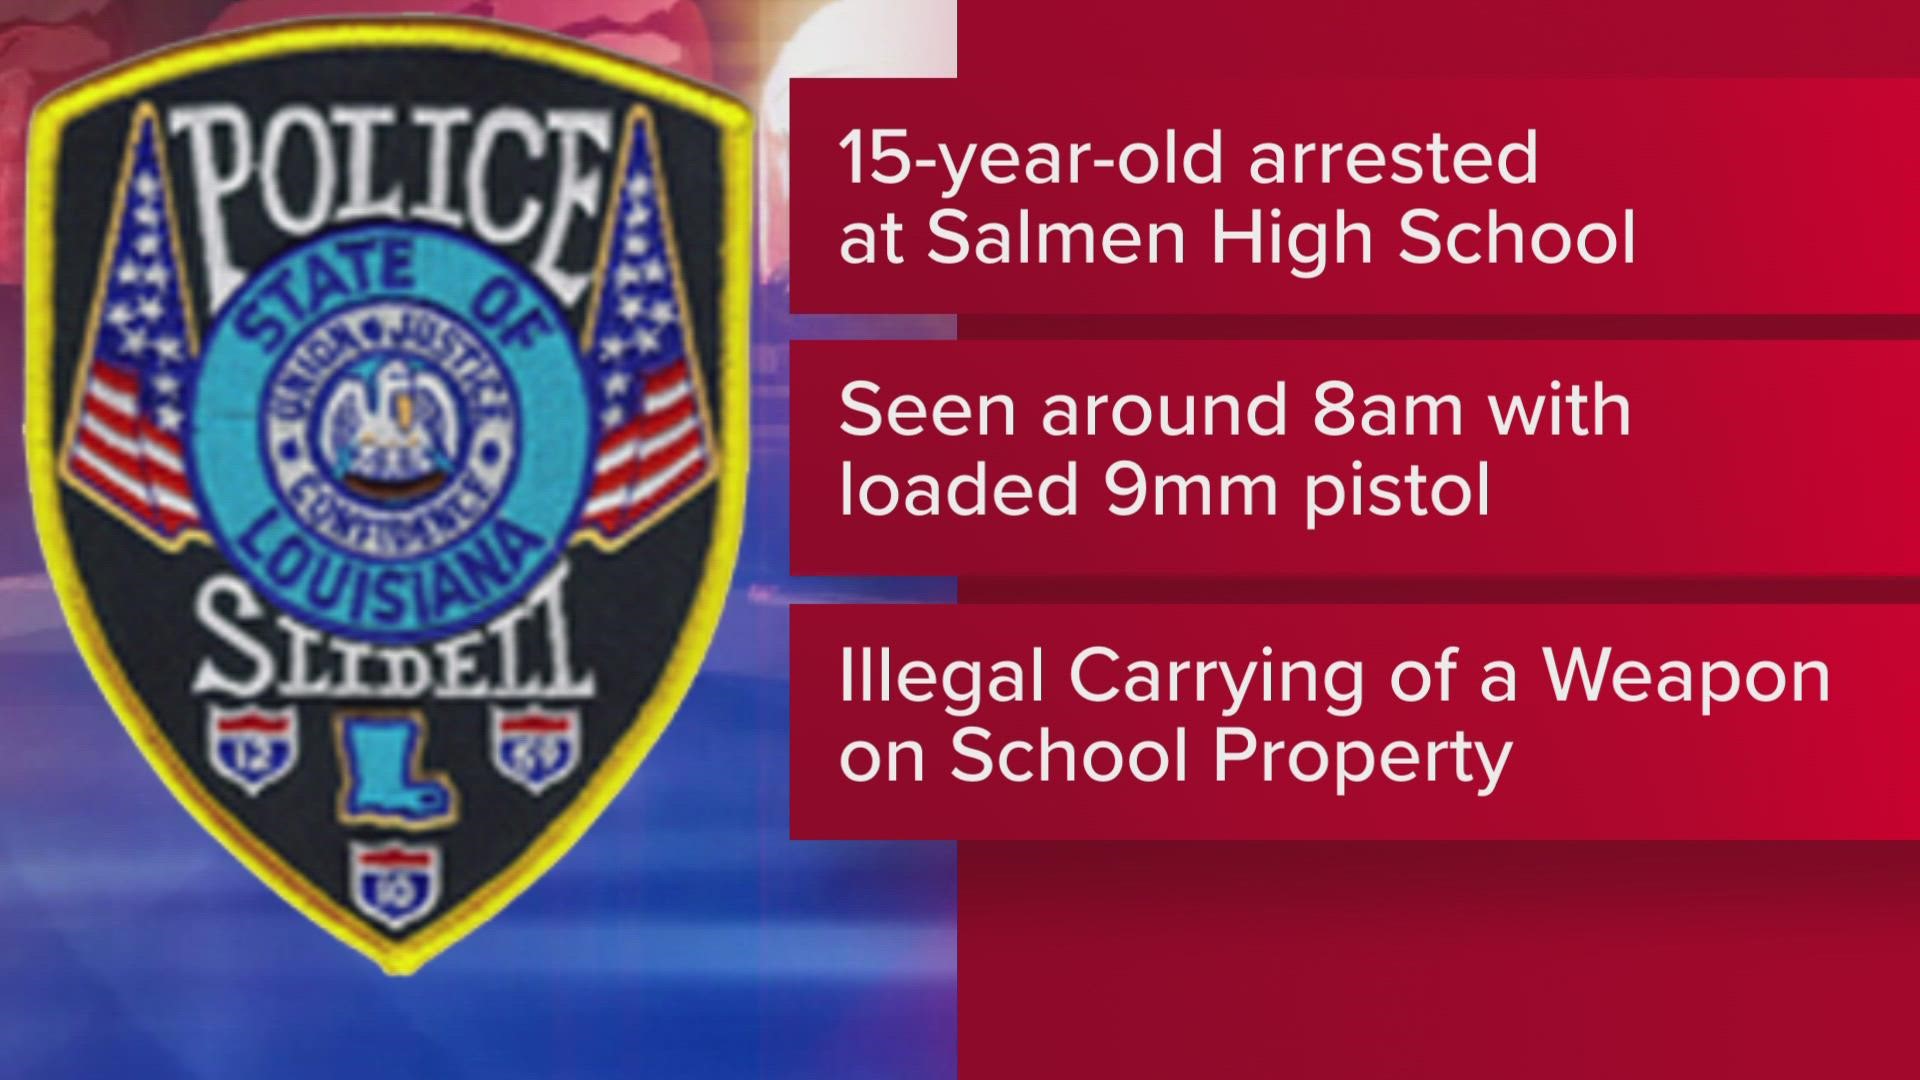 A police spokesperson said the student was quickly located and a 9mm handgun was found concealed in their waistband.